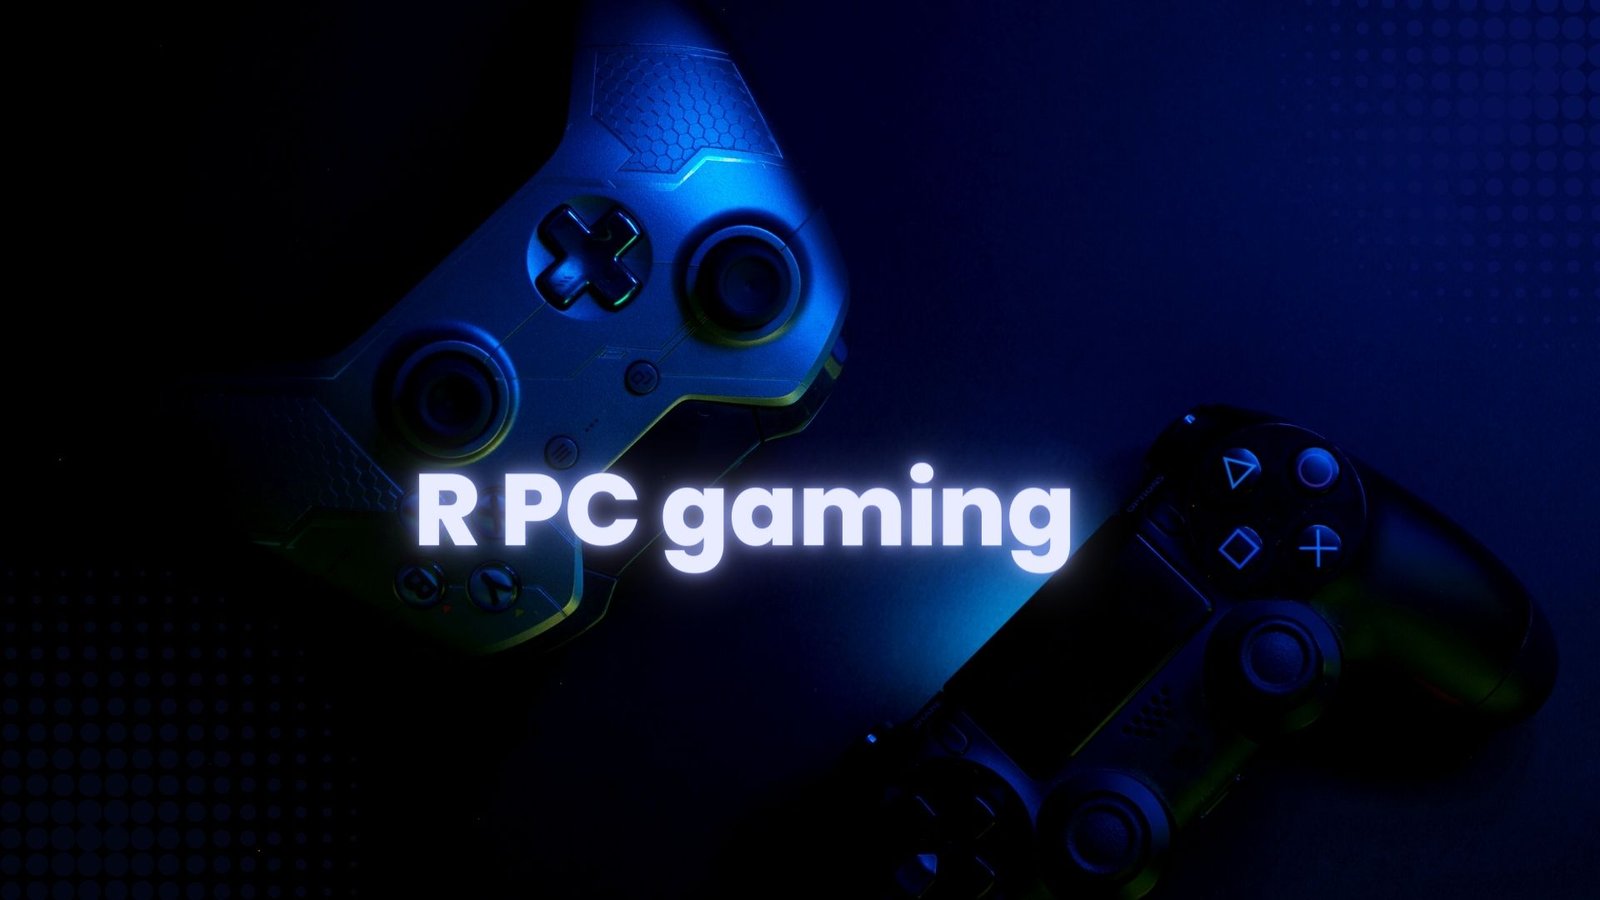 Discover R PCgaming – A hub for all your gaming needs